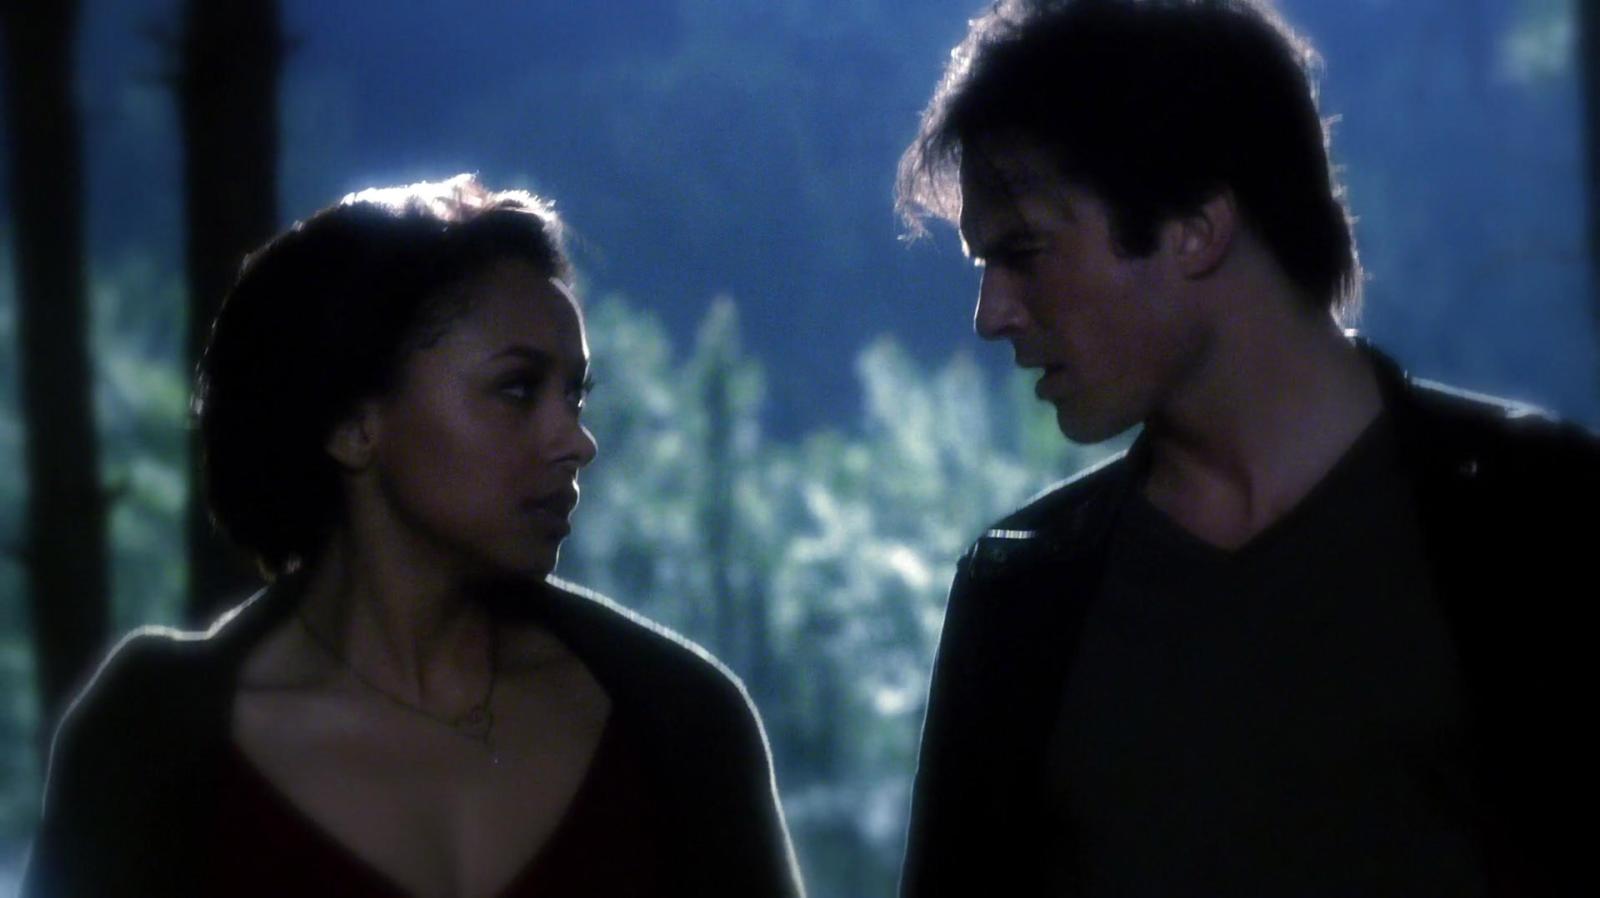 8 Vampire Diaries Episodes With the Most Shocking Cliffhangers - image 5